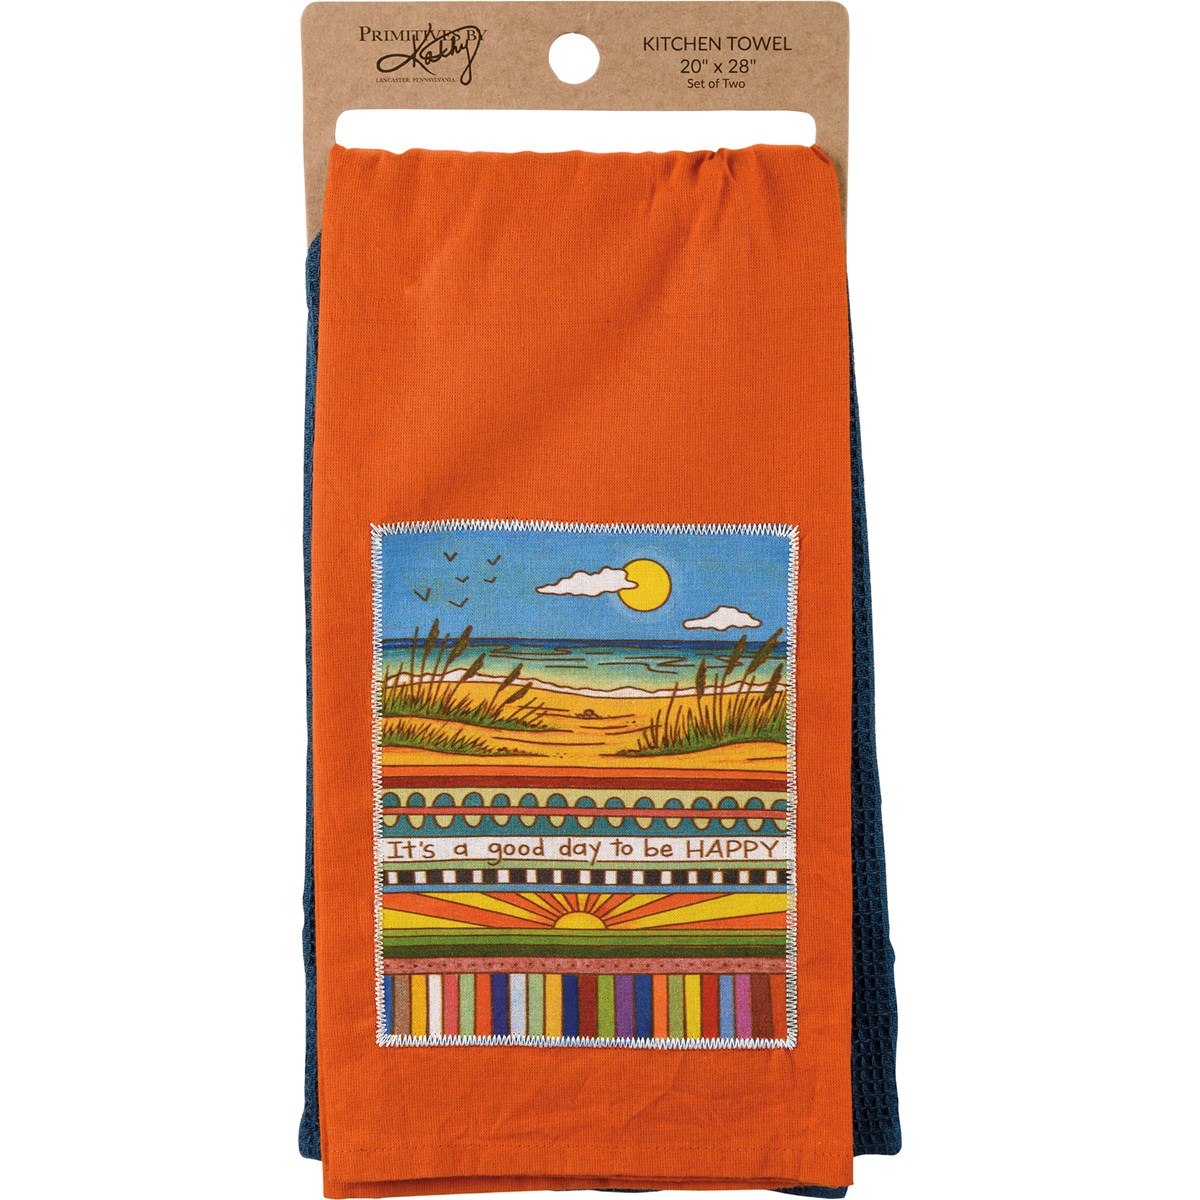 It's A Good Day To Be Happy Kitchen Towel Set - Cotton